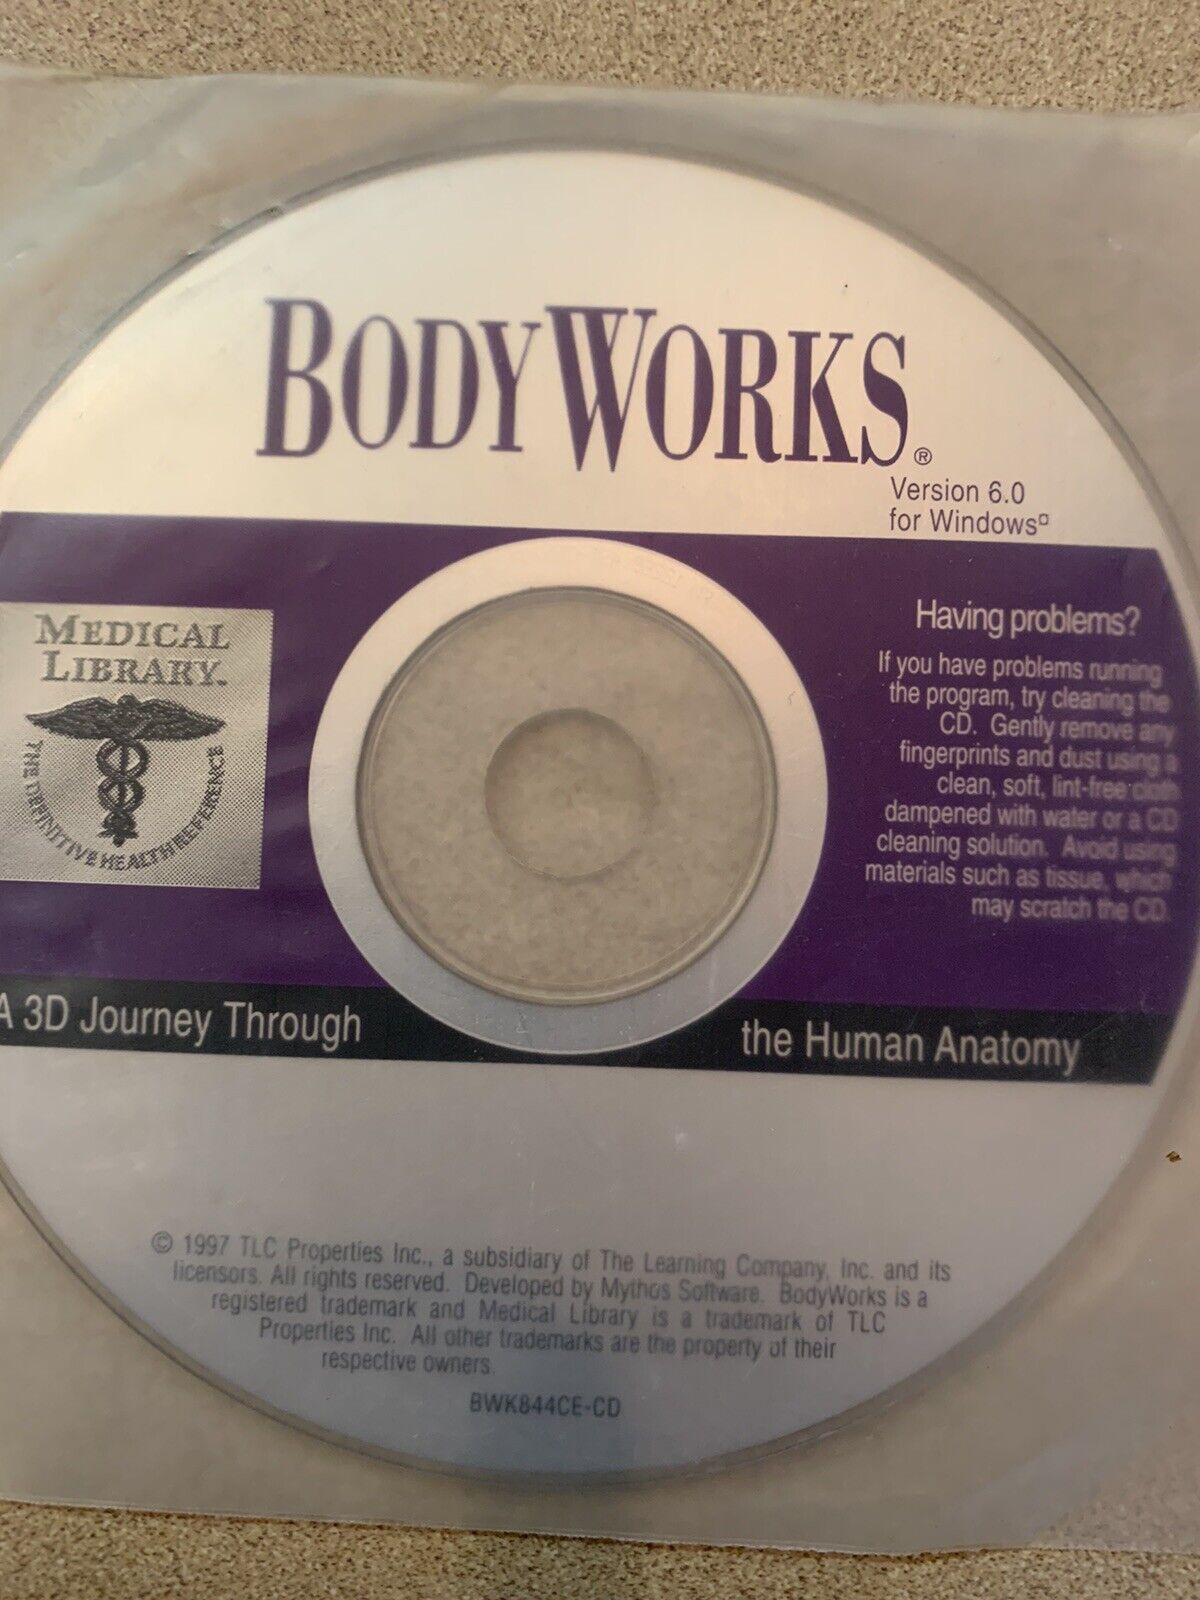 BodyWorks CD-ROM version 6.0 Anatomy reference library Mosby's 1997 Compton's 